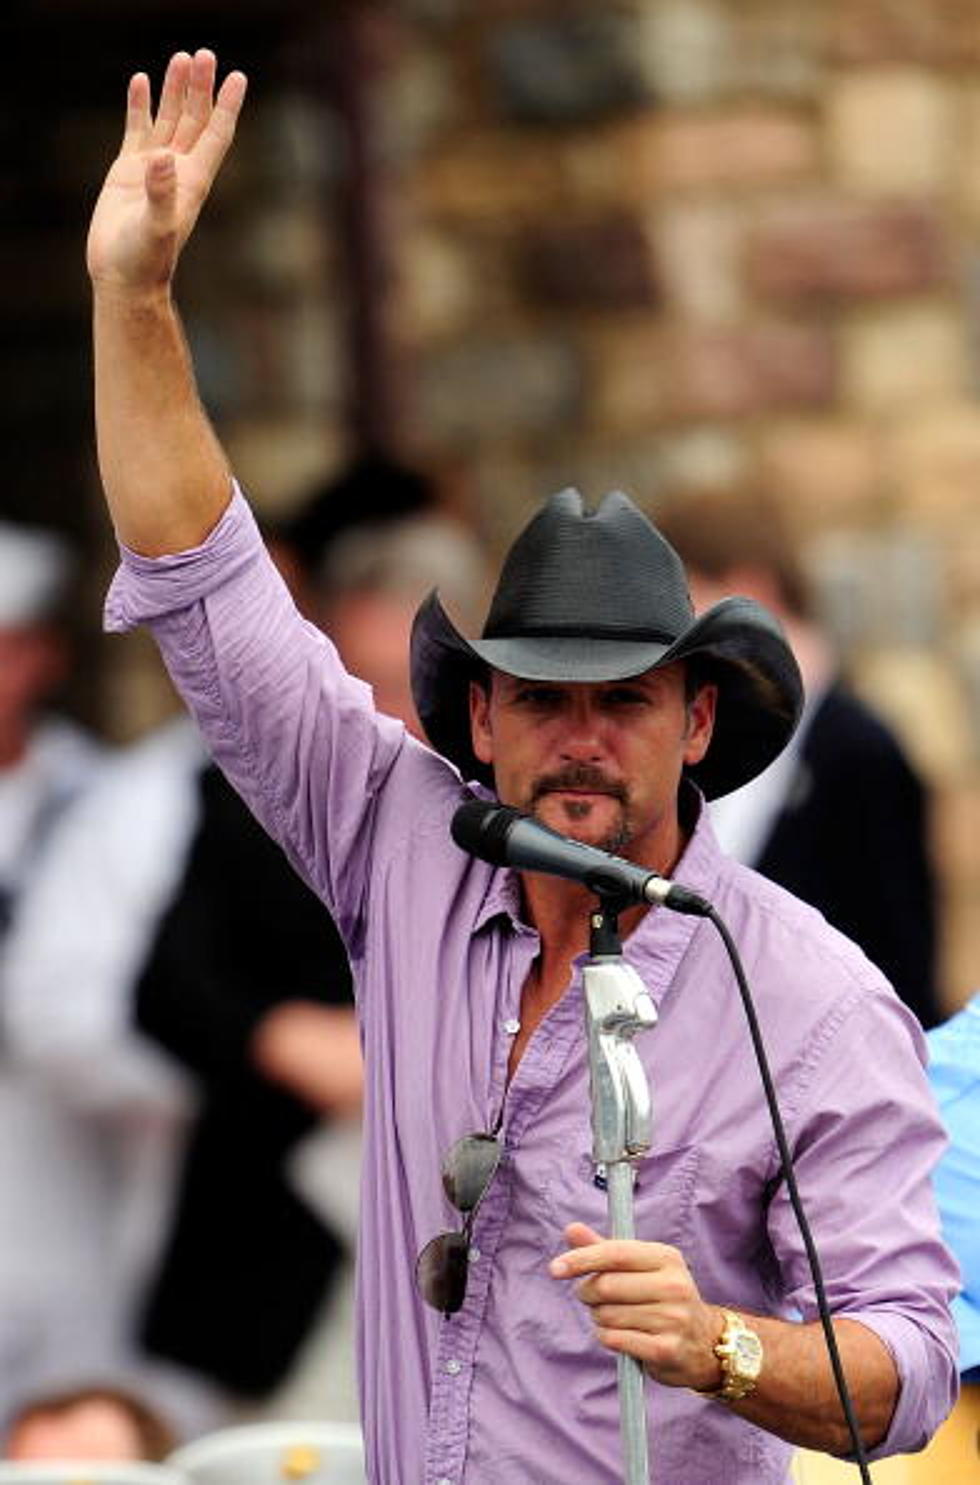 Tim McGraw Has No Plans To Run For Public Office – Yet